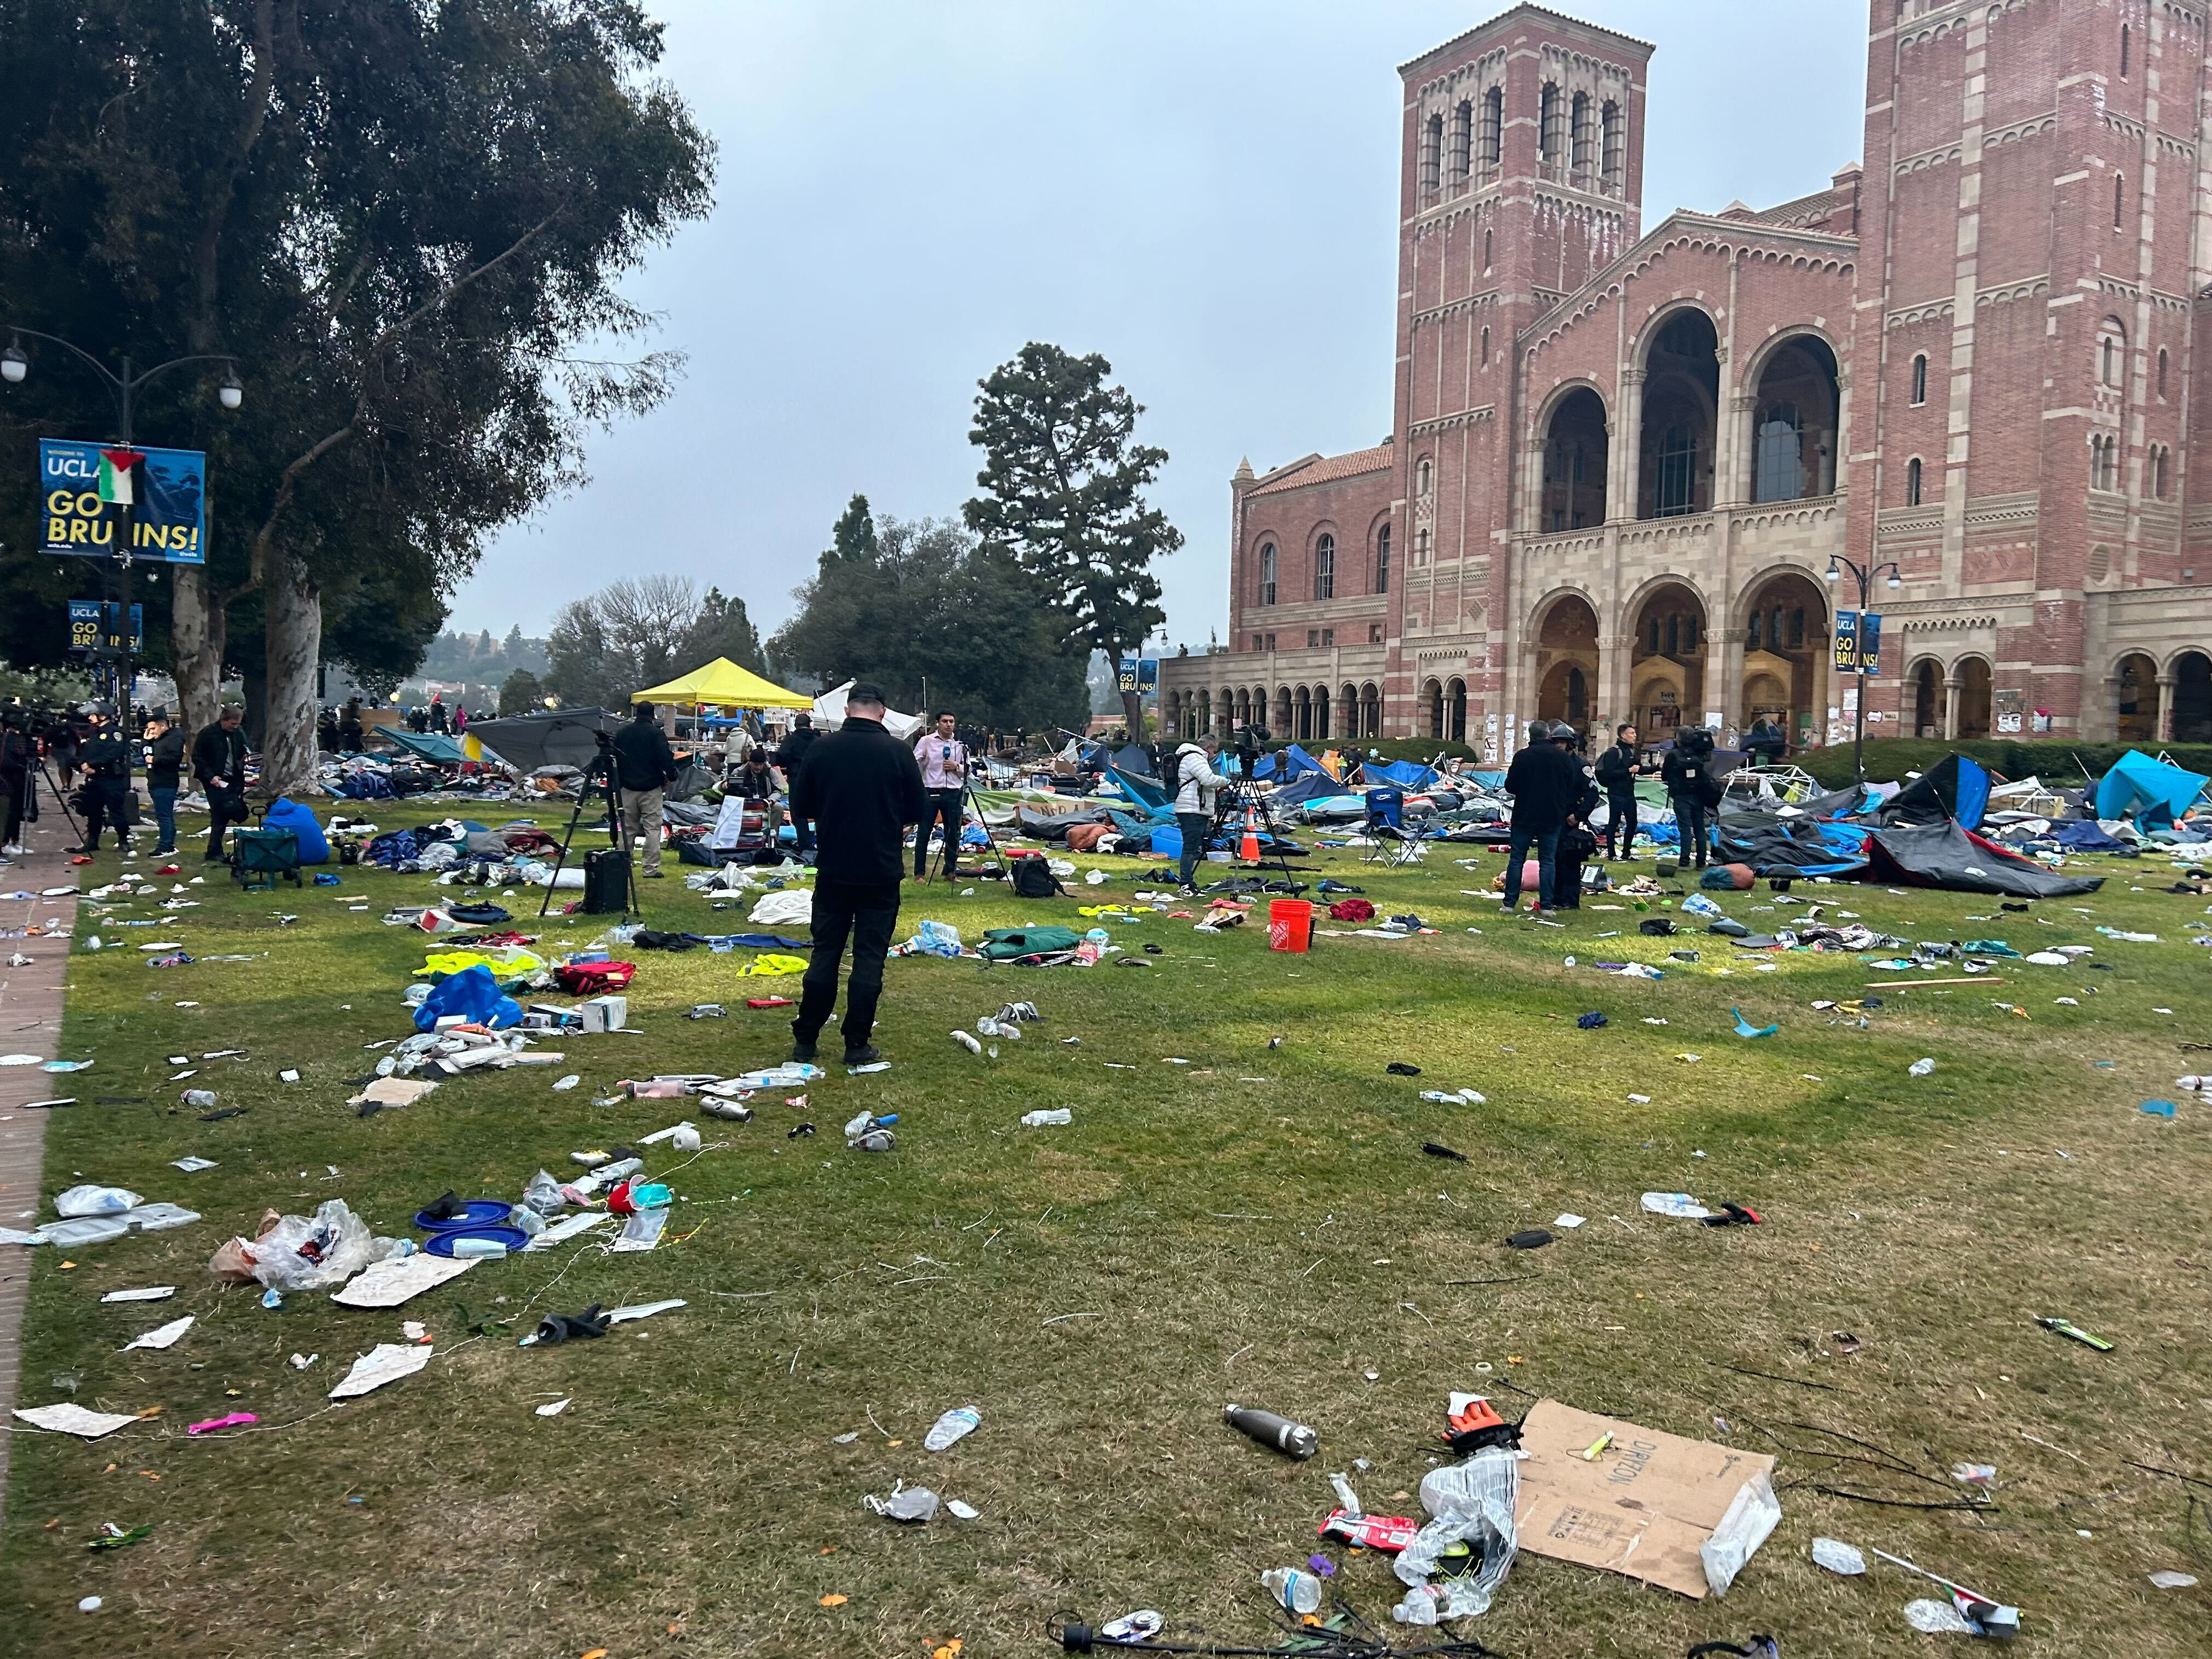 Cleanup of the UCLA encampment is underway